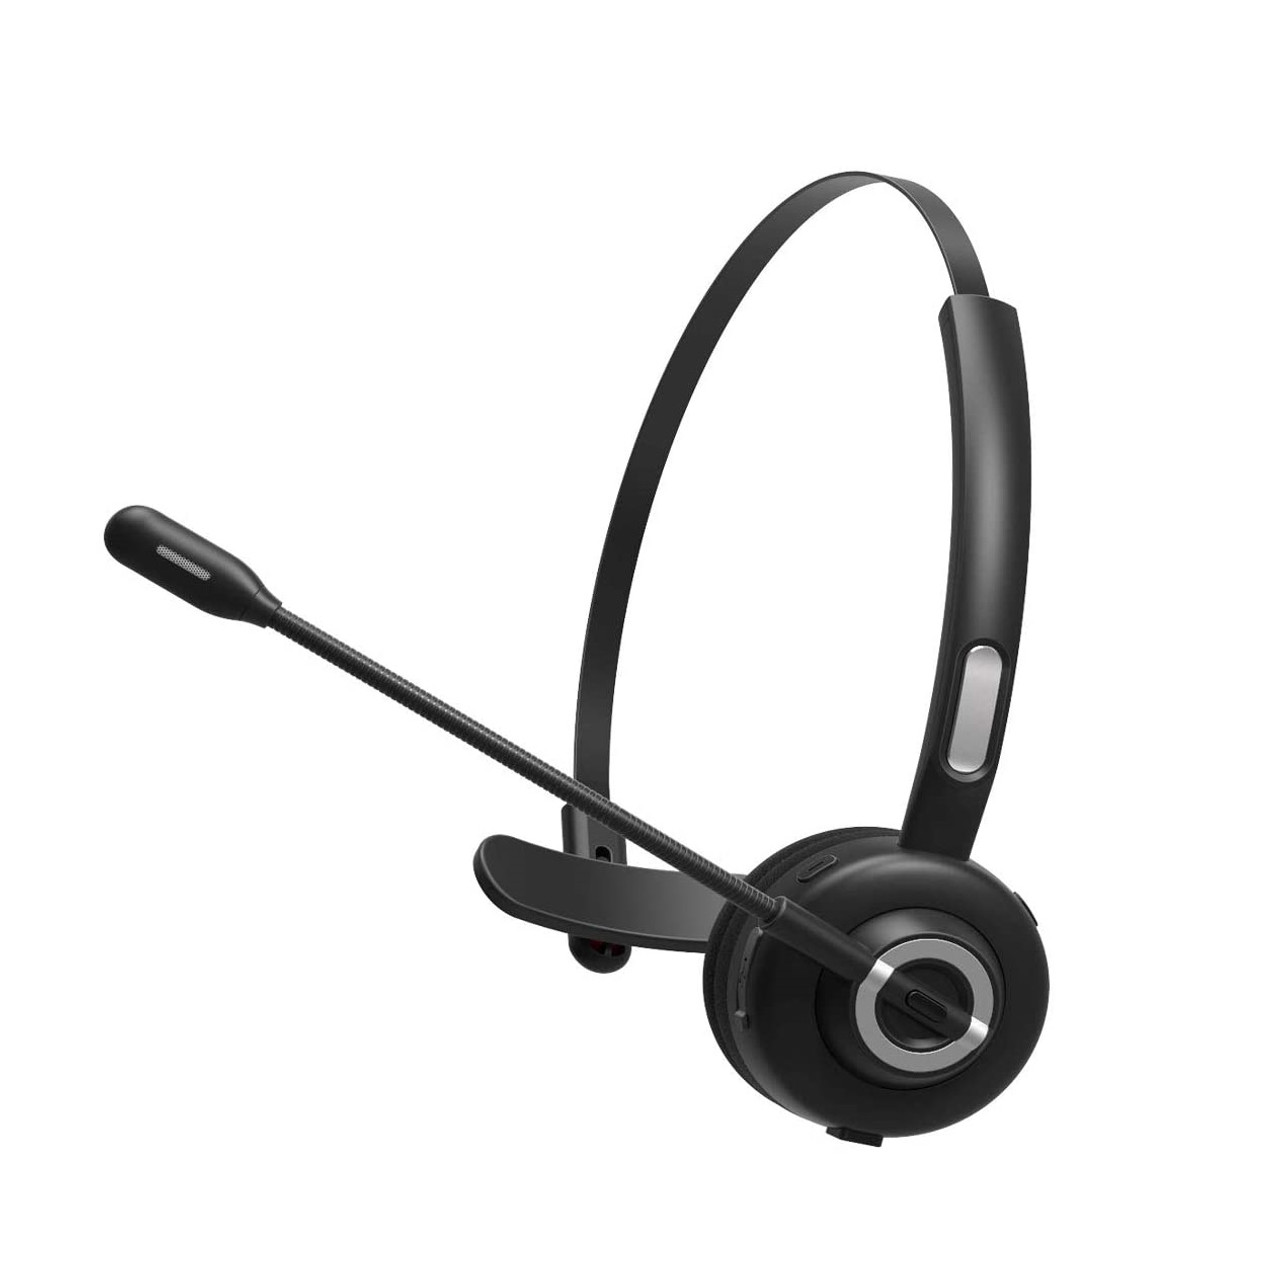 Infinity Trucker Bluetooth Call Center Headset with Microphone